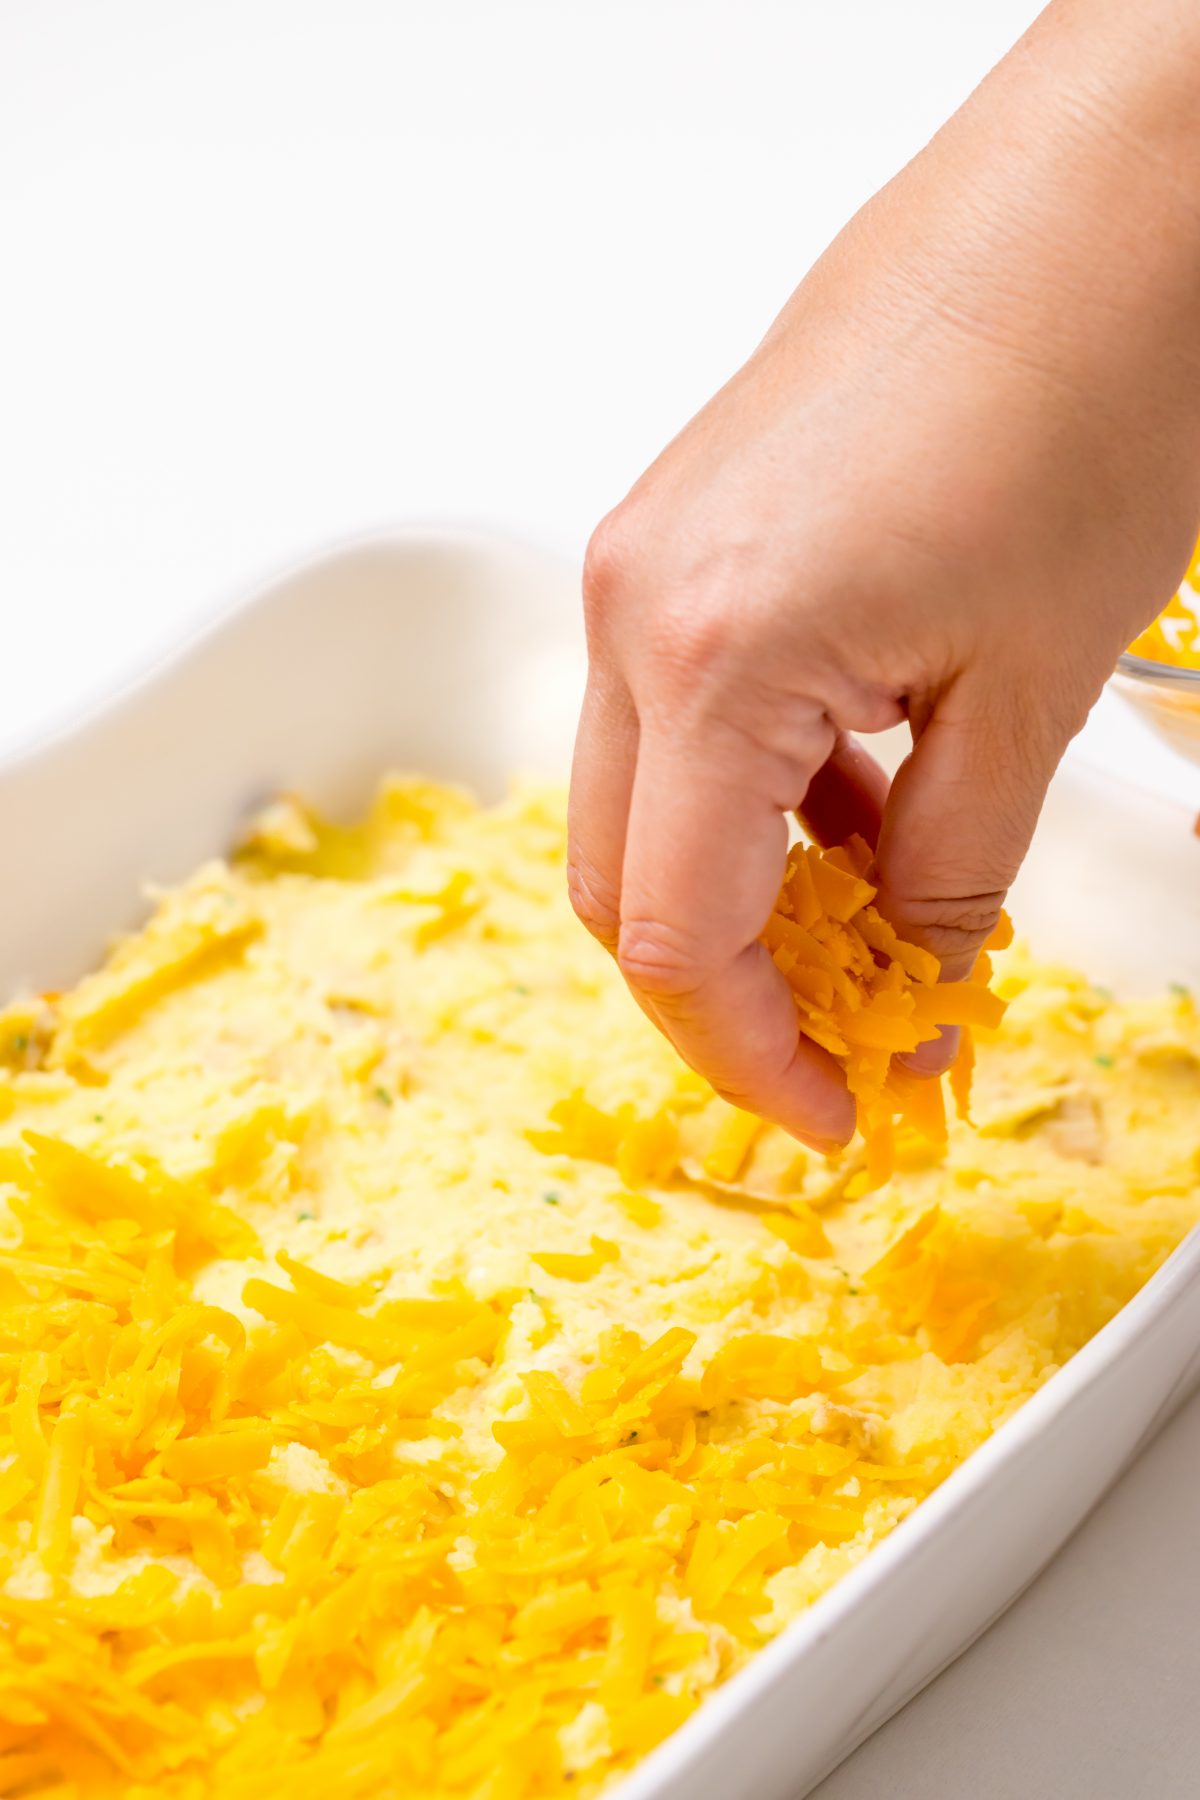 After placing one half of the mashed potatoes into the dish, top with cheddar cheese.